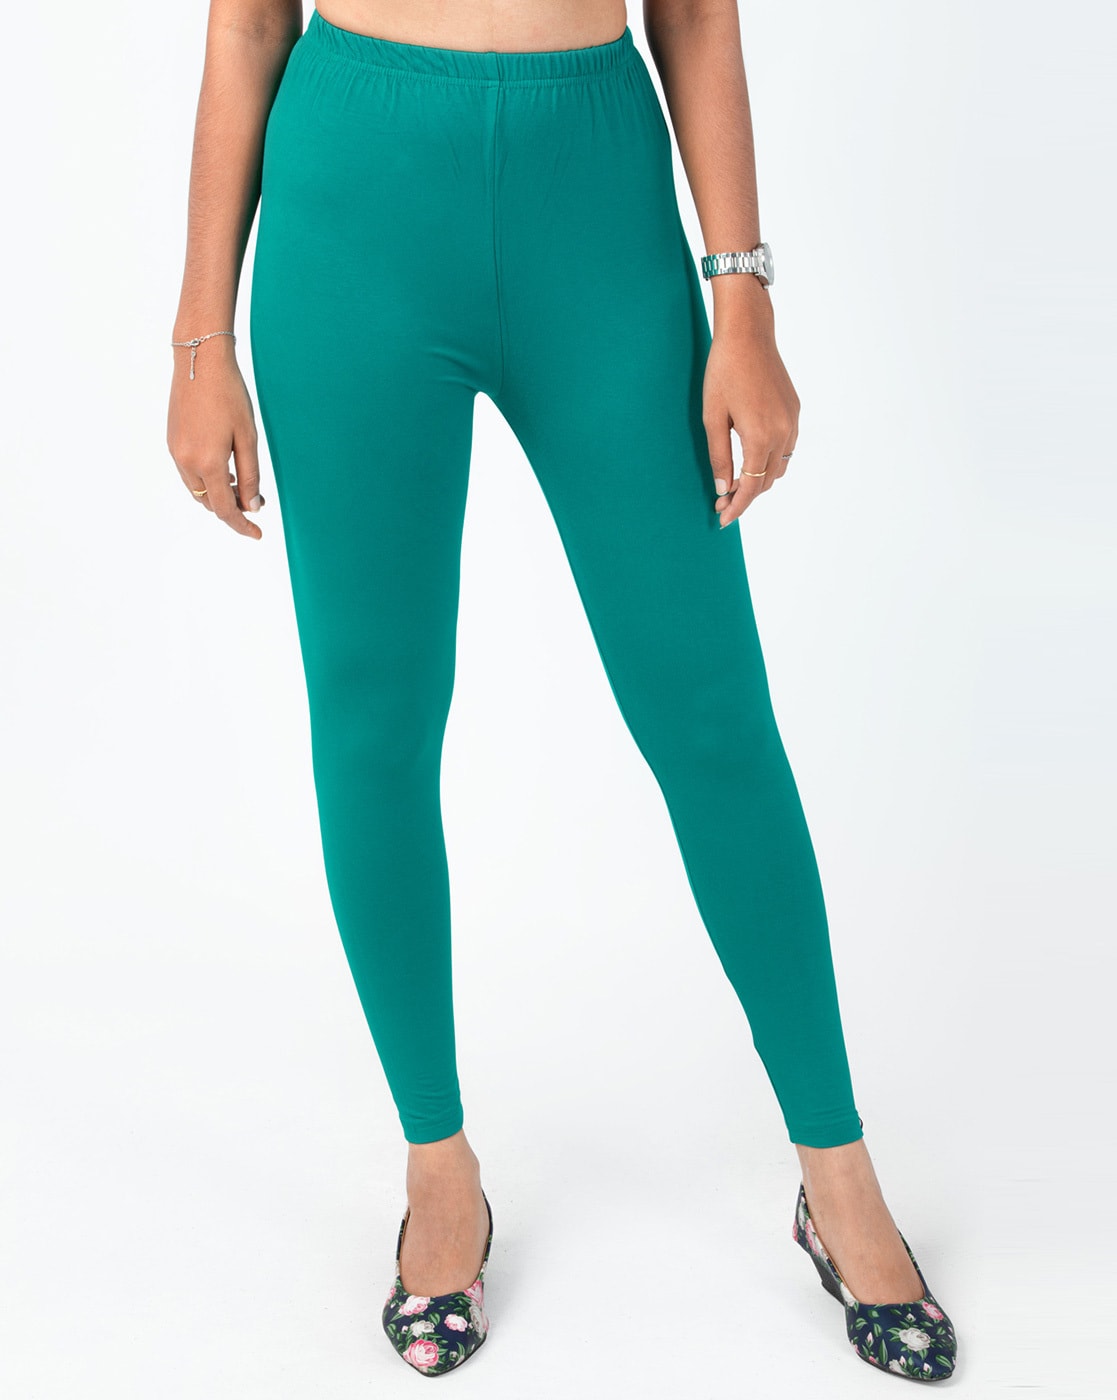 Prisma Sky Blue Ankle Leggings | Stylish and Comfortable